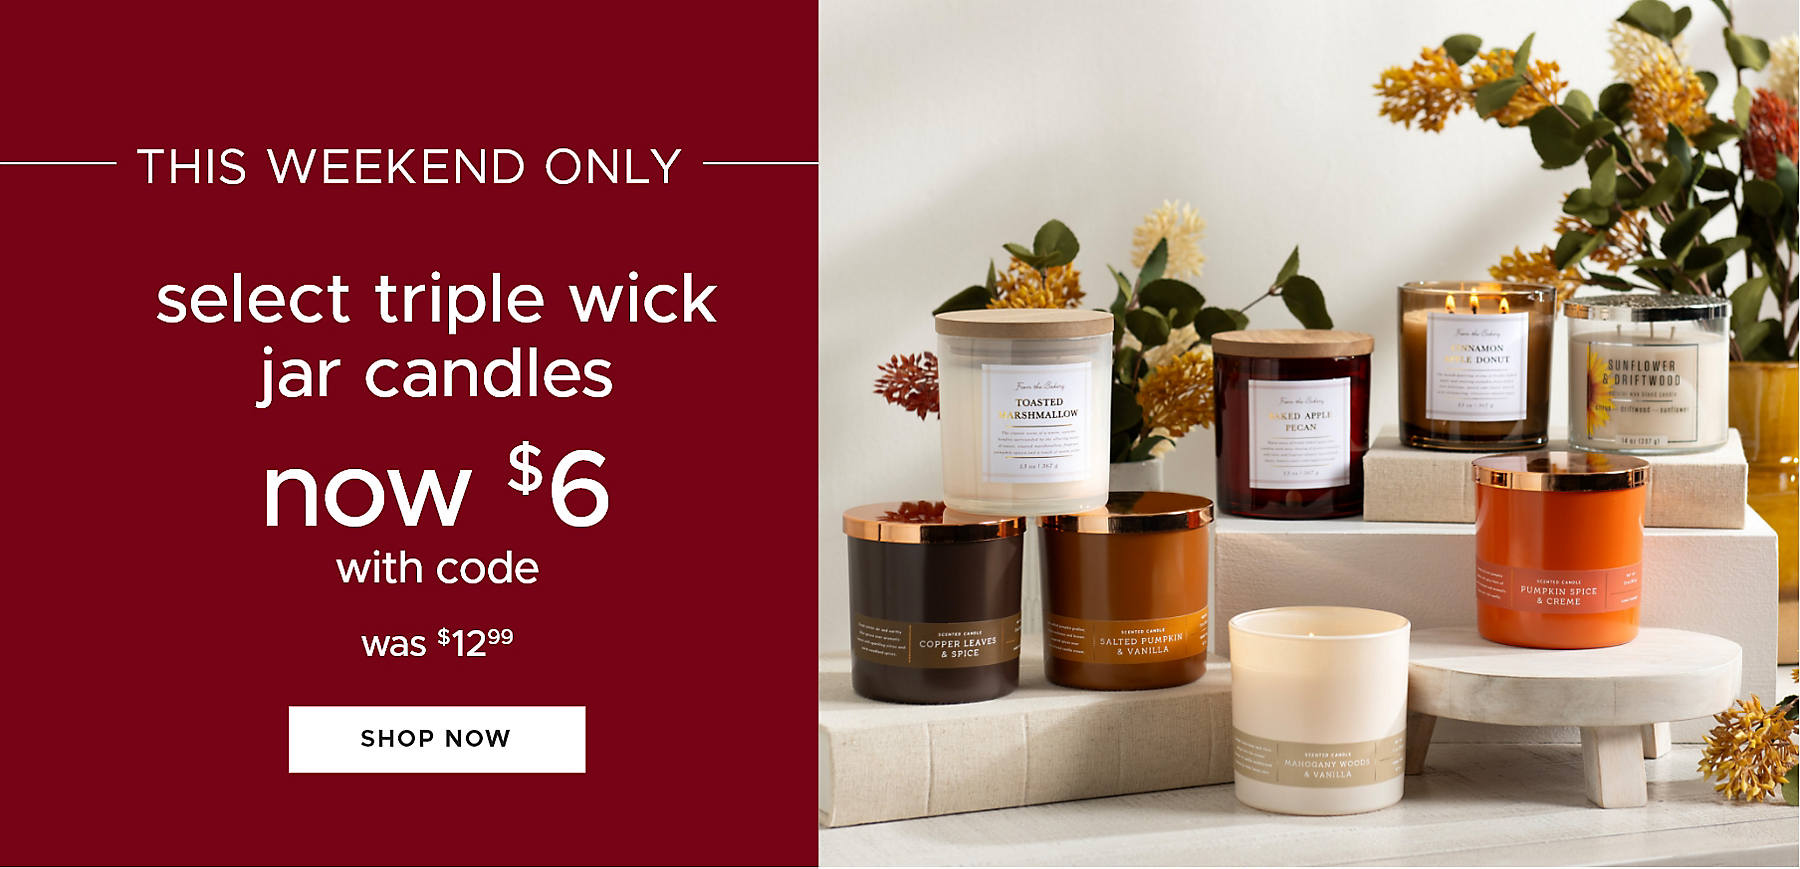 this weekend only select triple wick jar candles now $6 with code was $12.99 shop now